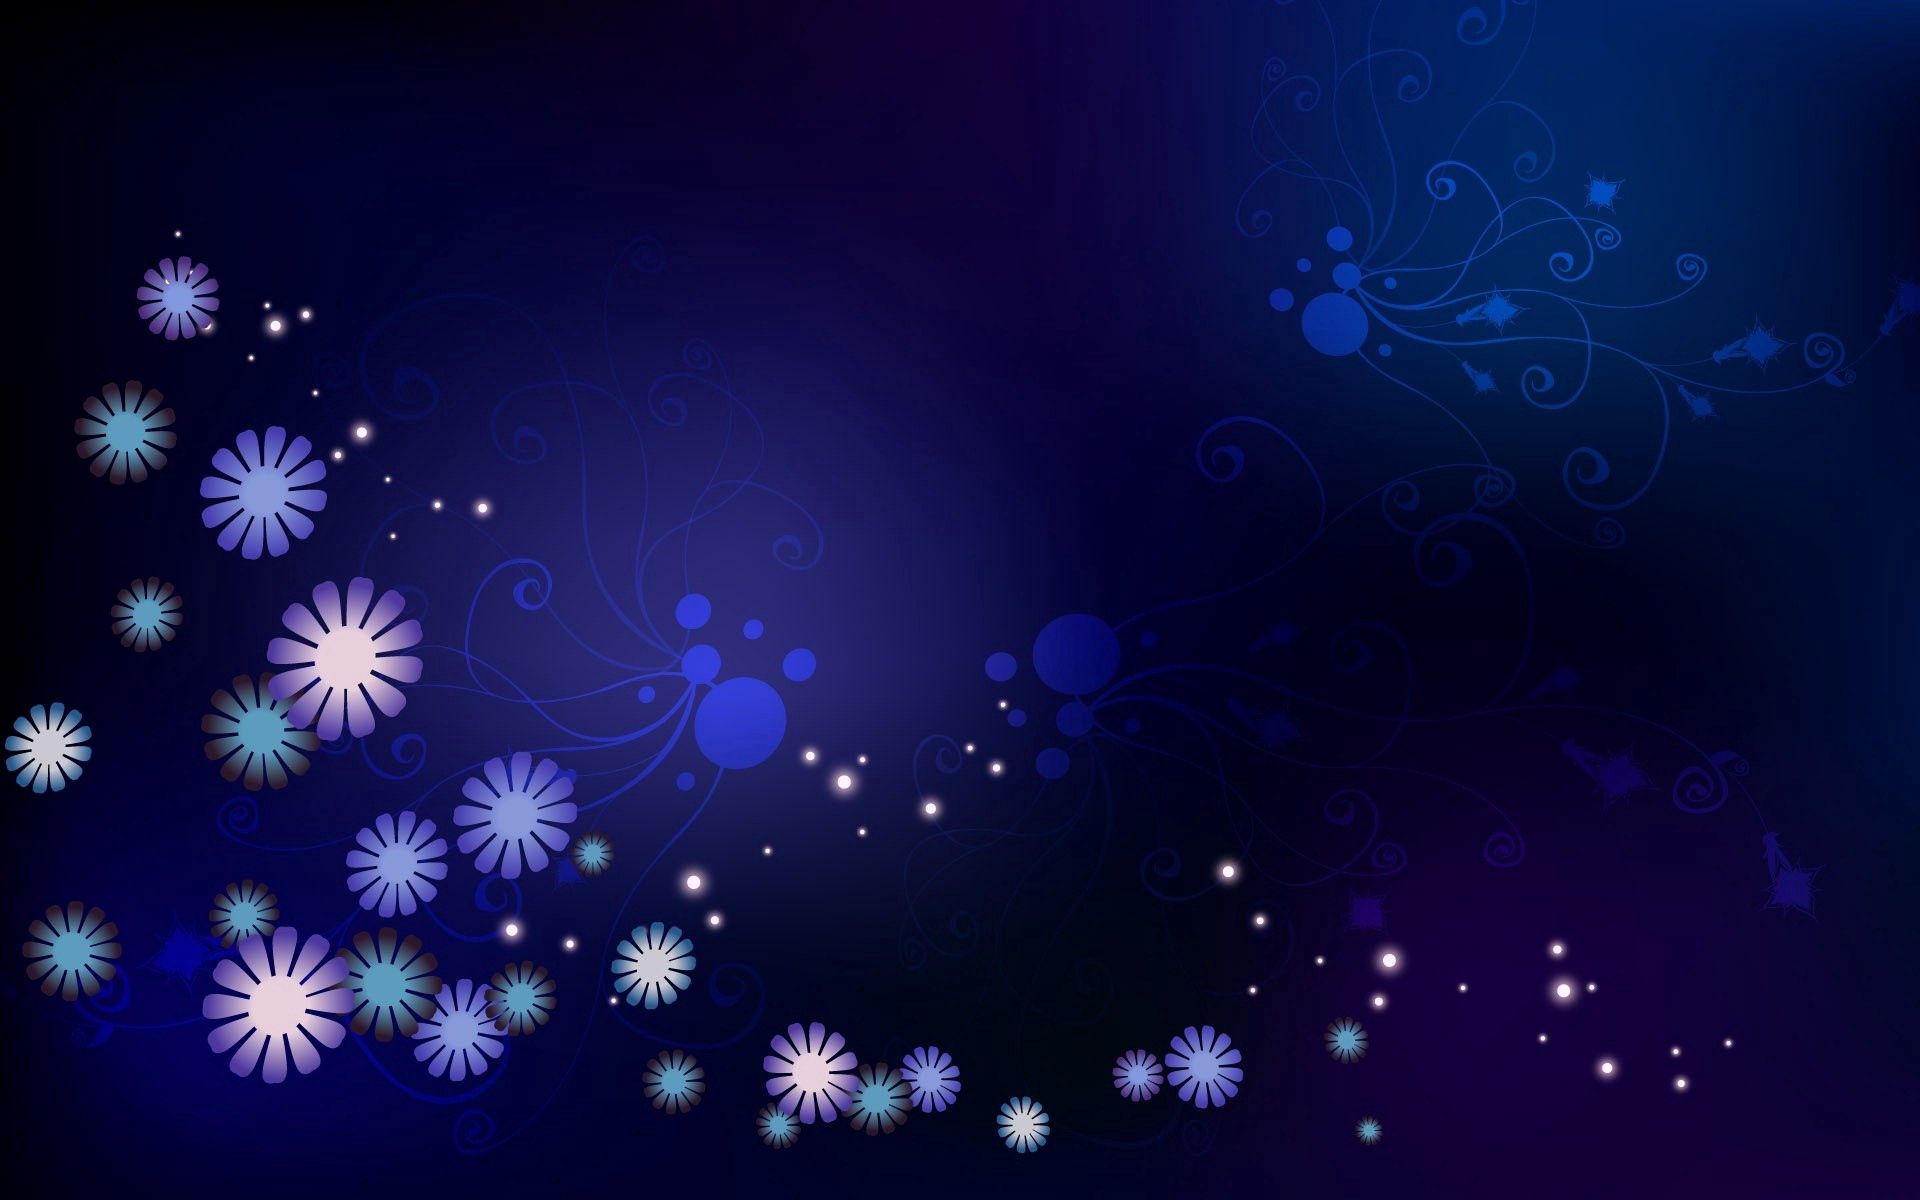 color, points, point, flowers, abstract, background, stars, circles, shine, light